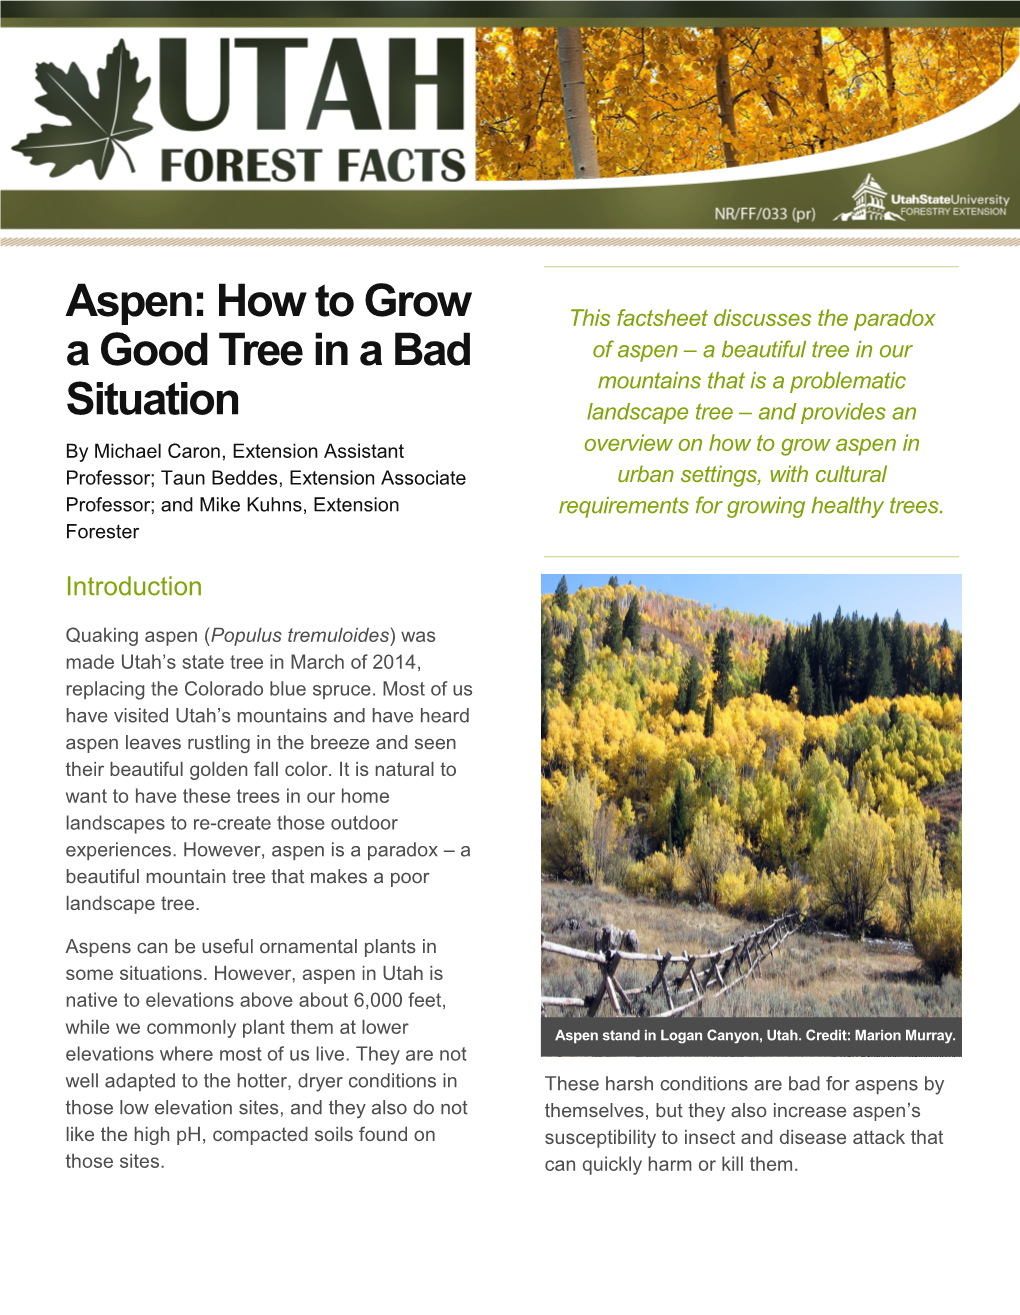 Aspen: How to Grow a Good Tree in a Bad Situation